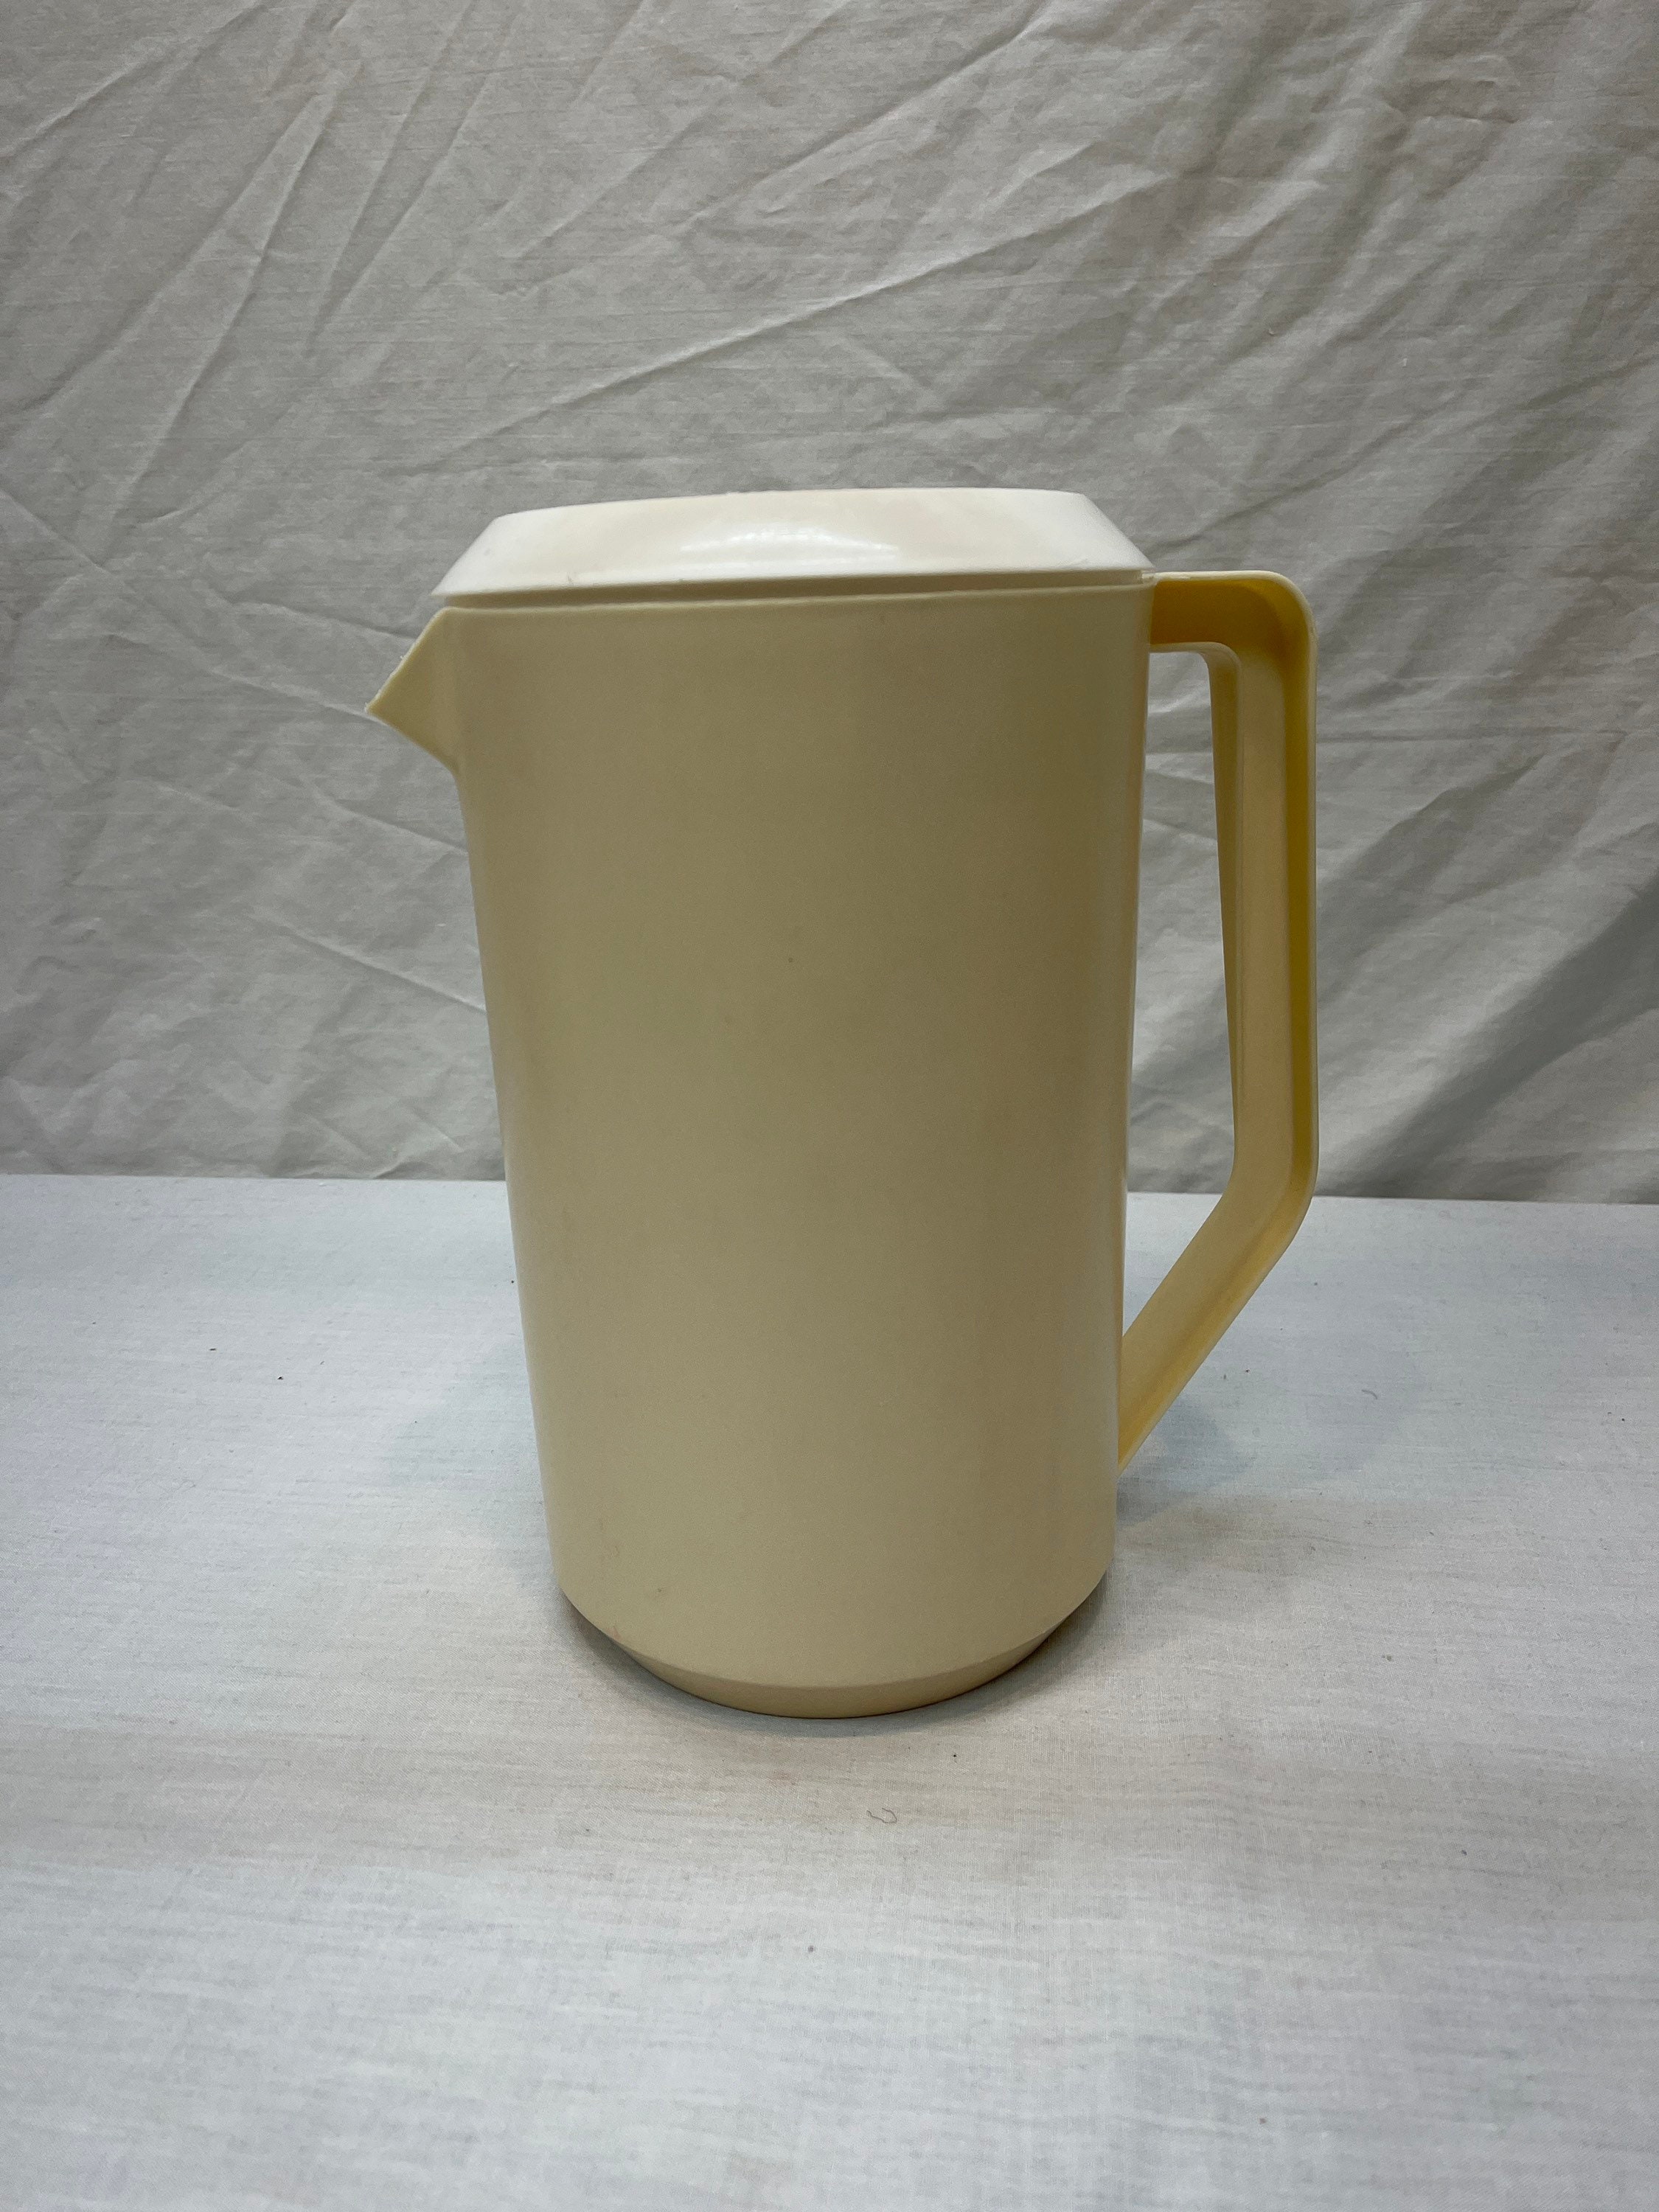 The Rubbermaid 1-gallon pitcher: holding a lifetime of Tang, lemonade, and  ice tea. : r/BuyItForLife